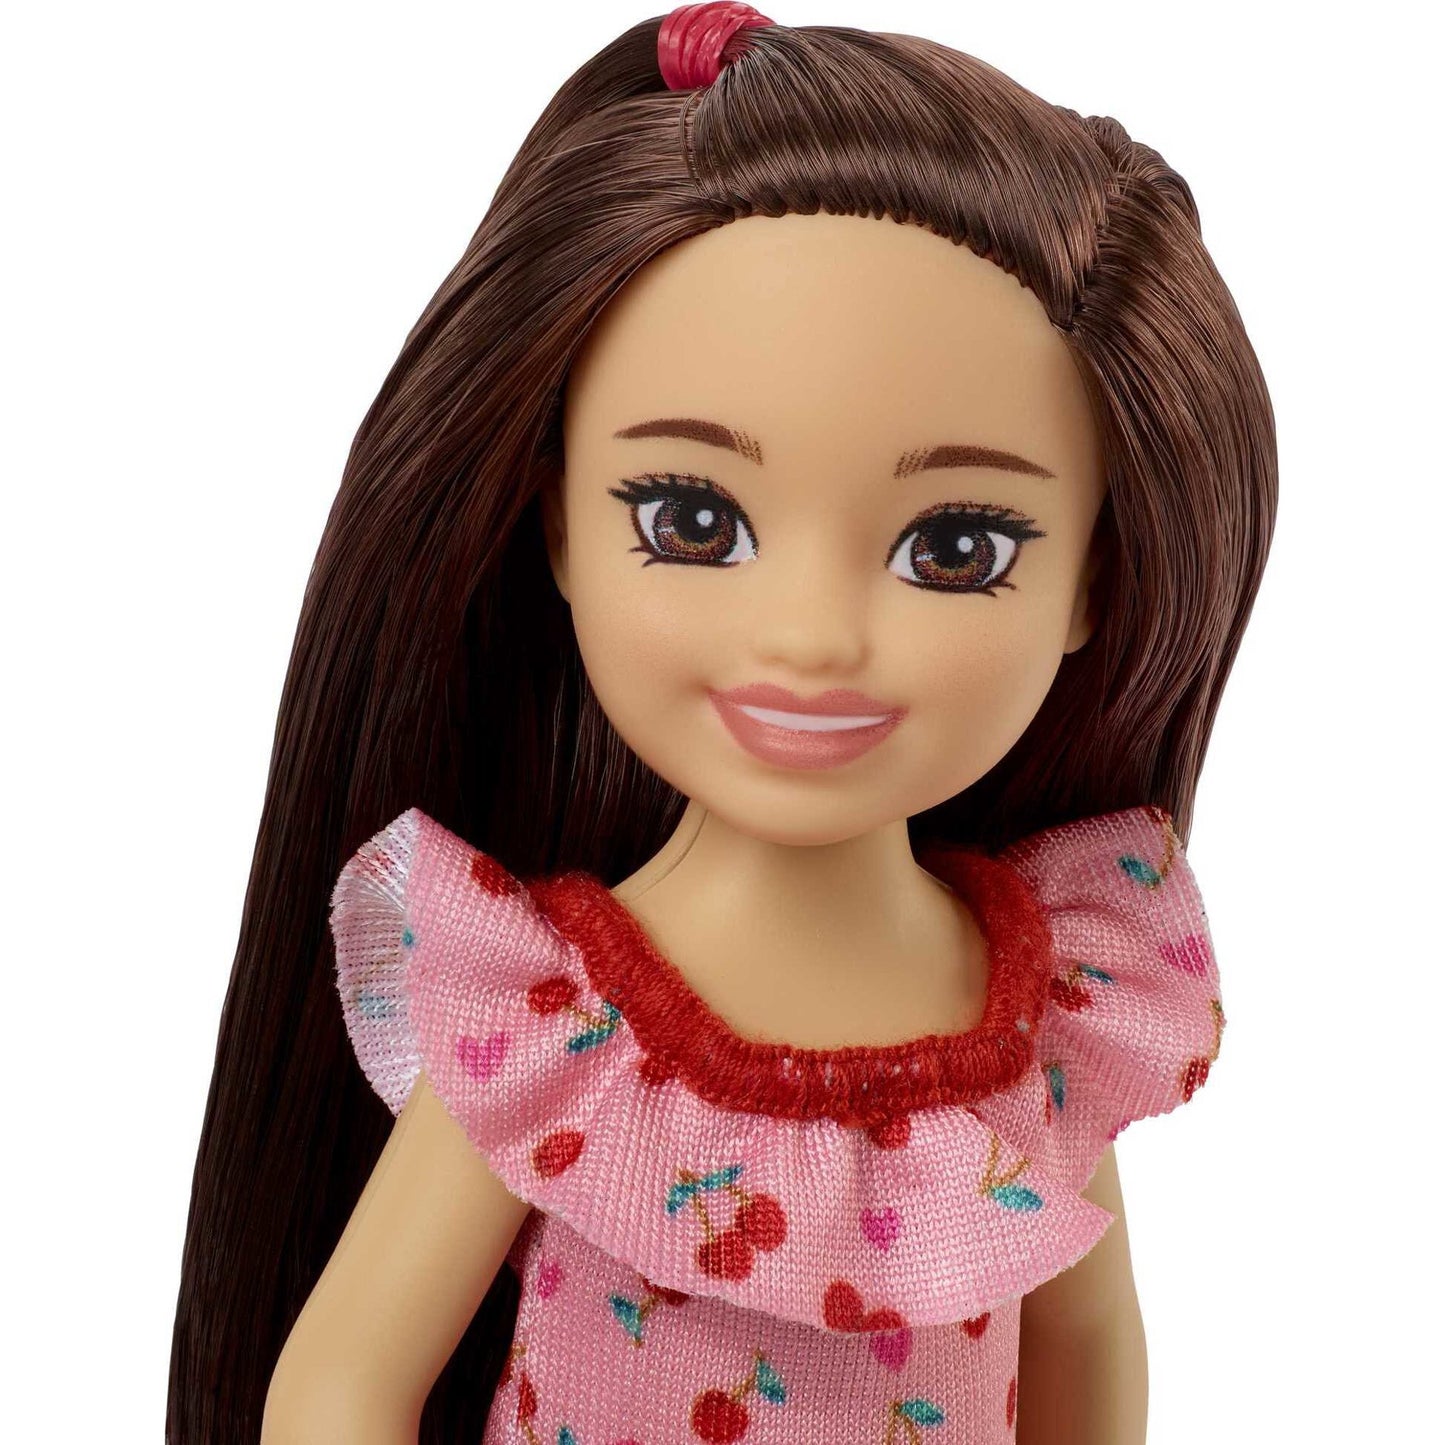 Barbie Chelsea Doll (Brunette) in Cherry-Print Dress, For 3 Year Olds & Up